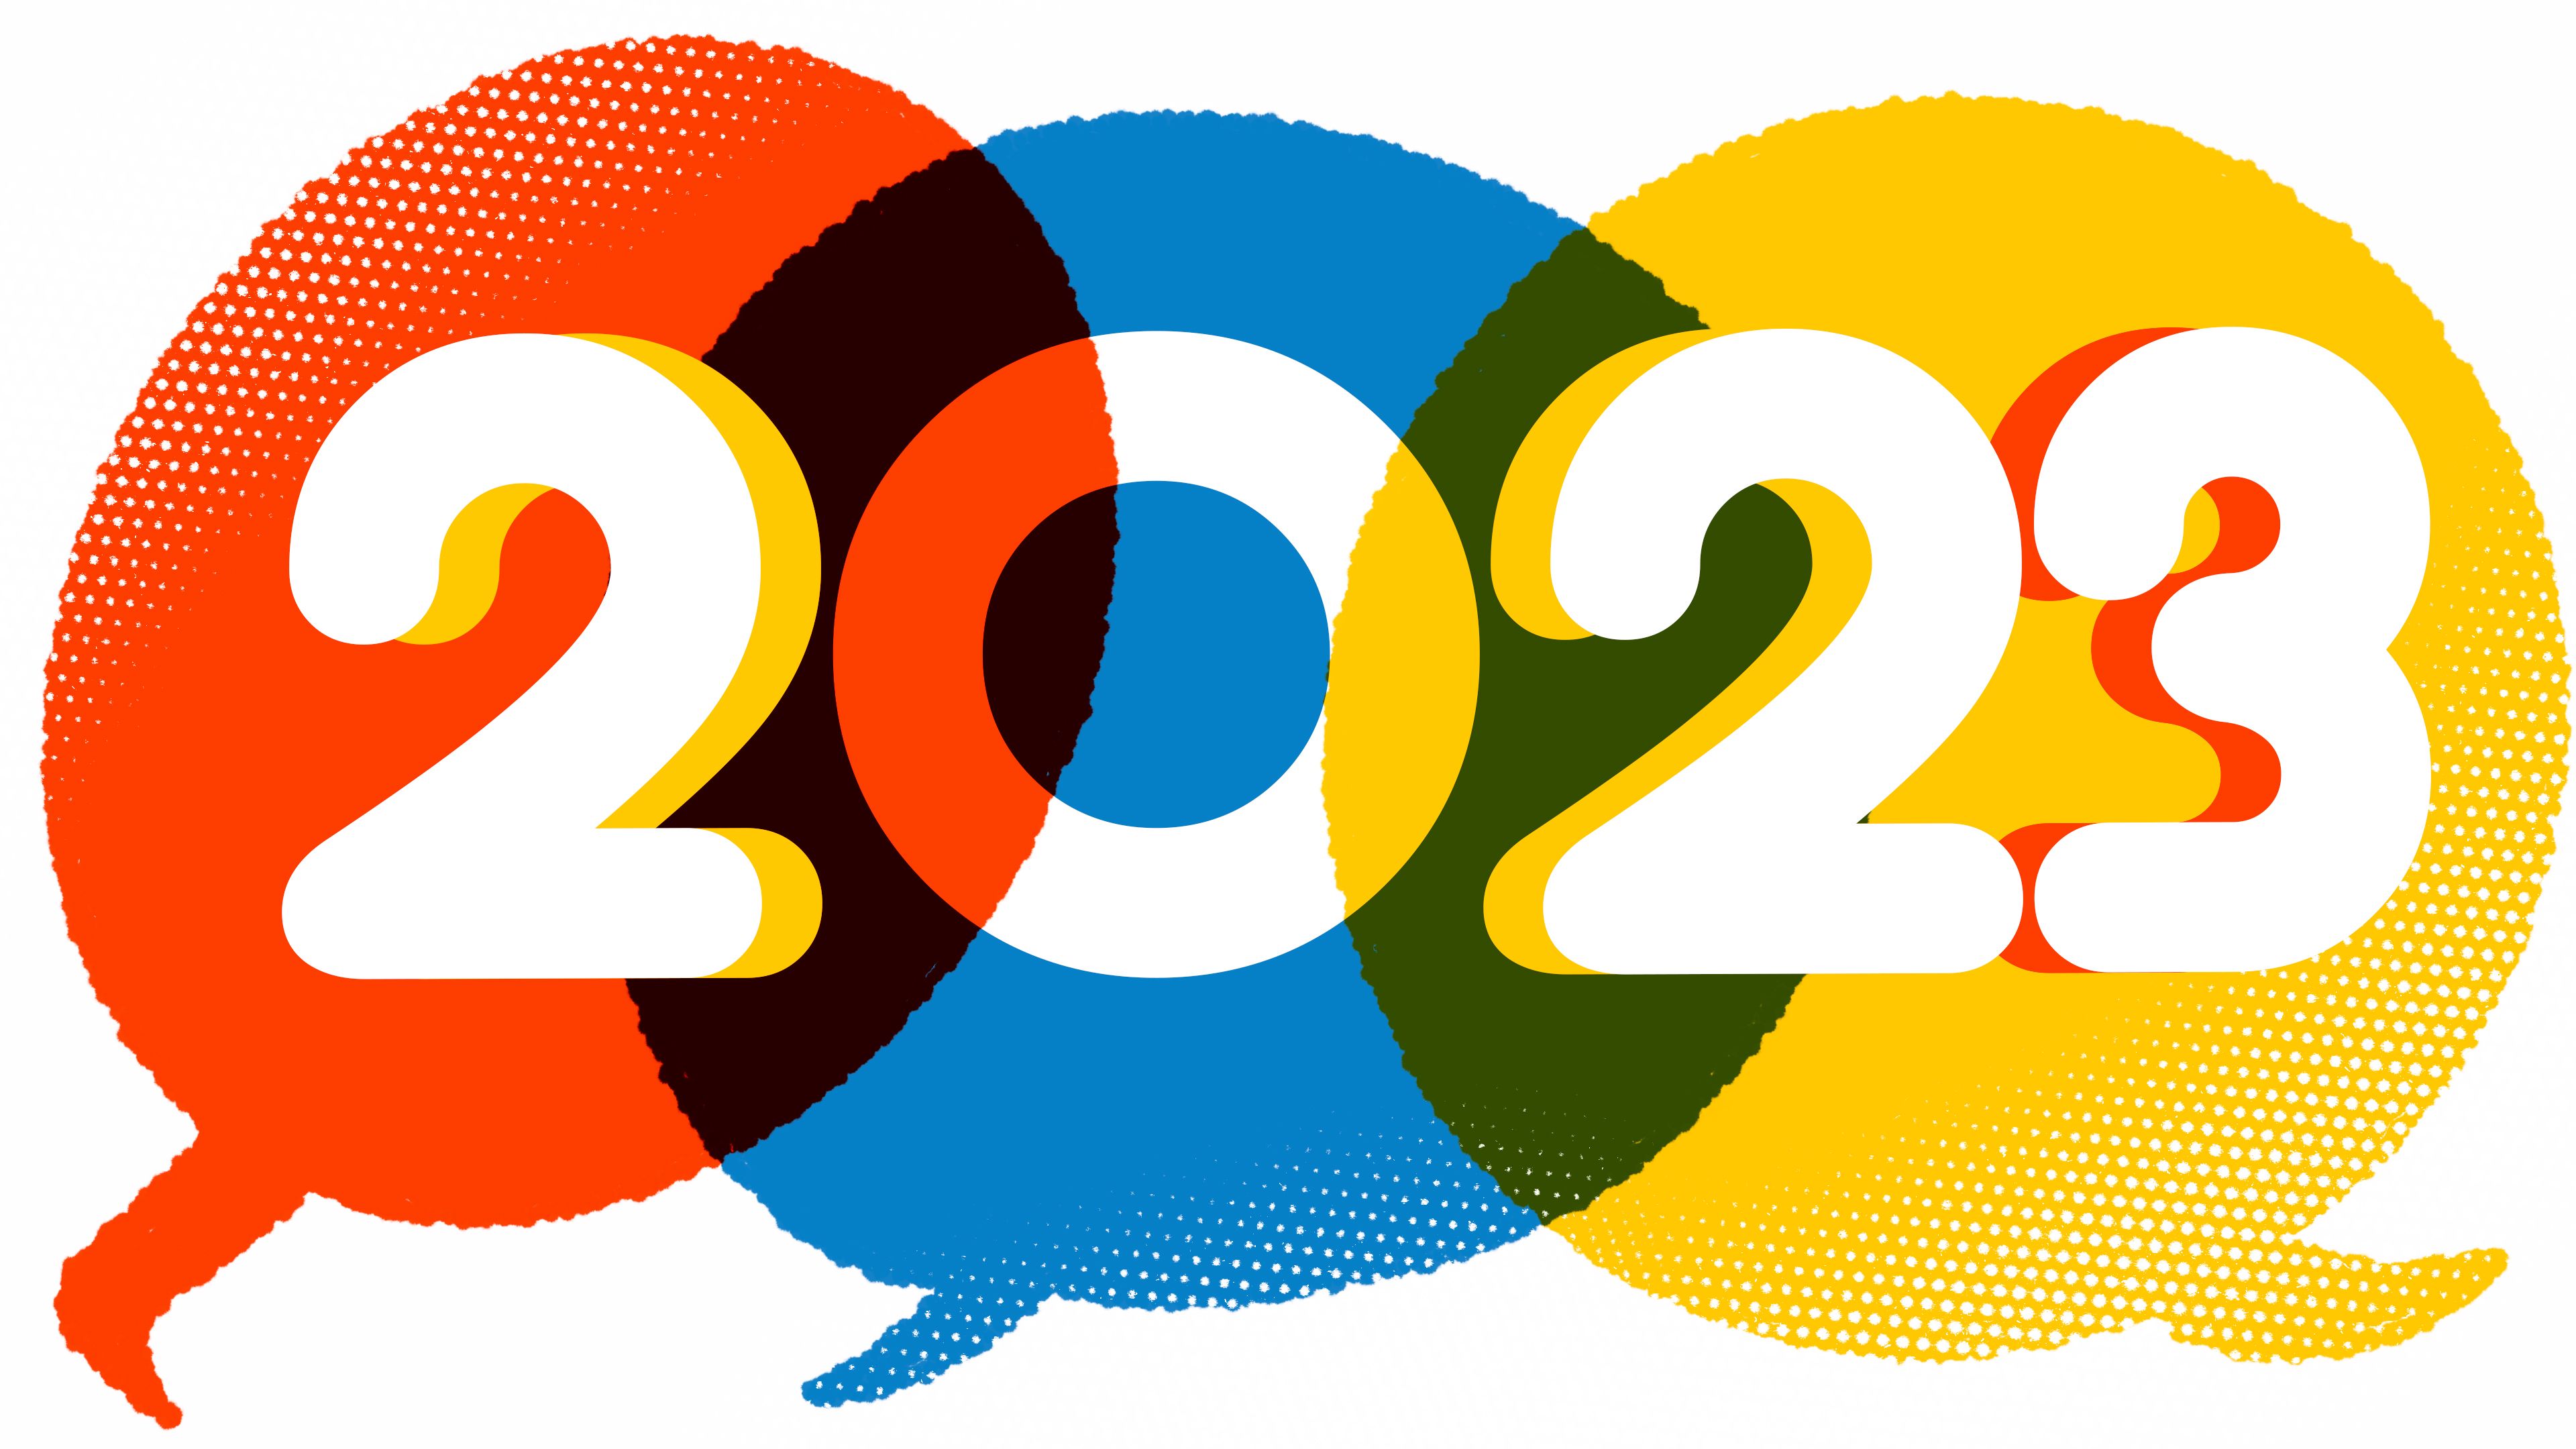 3 Conversations to Follow in 2023